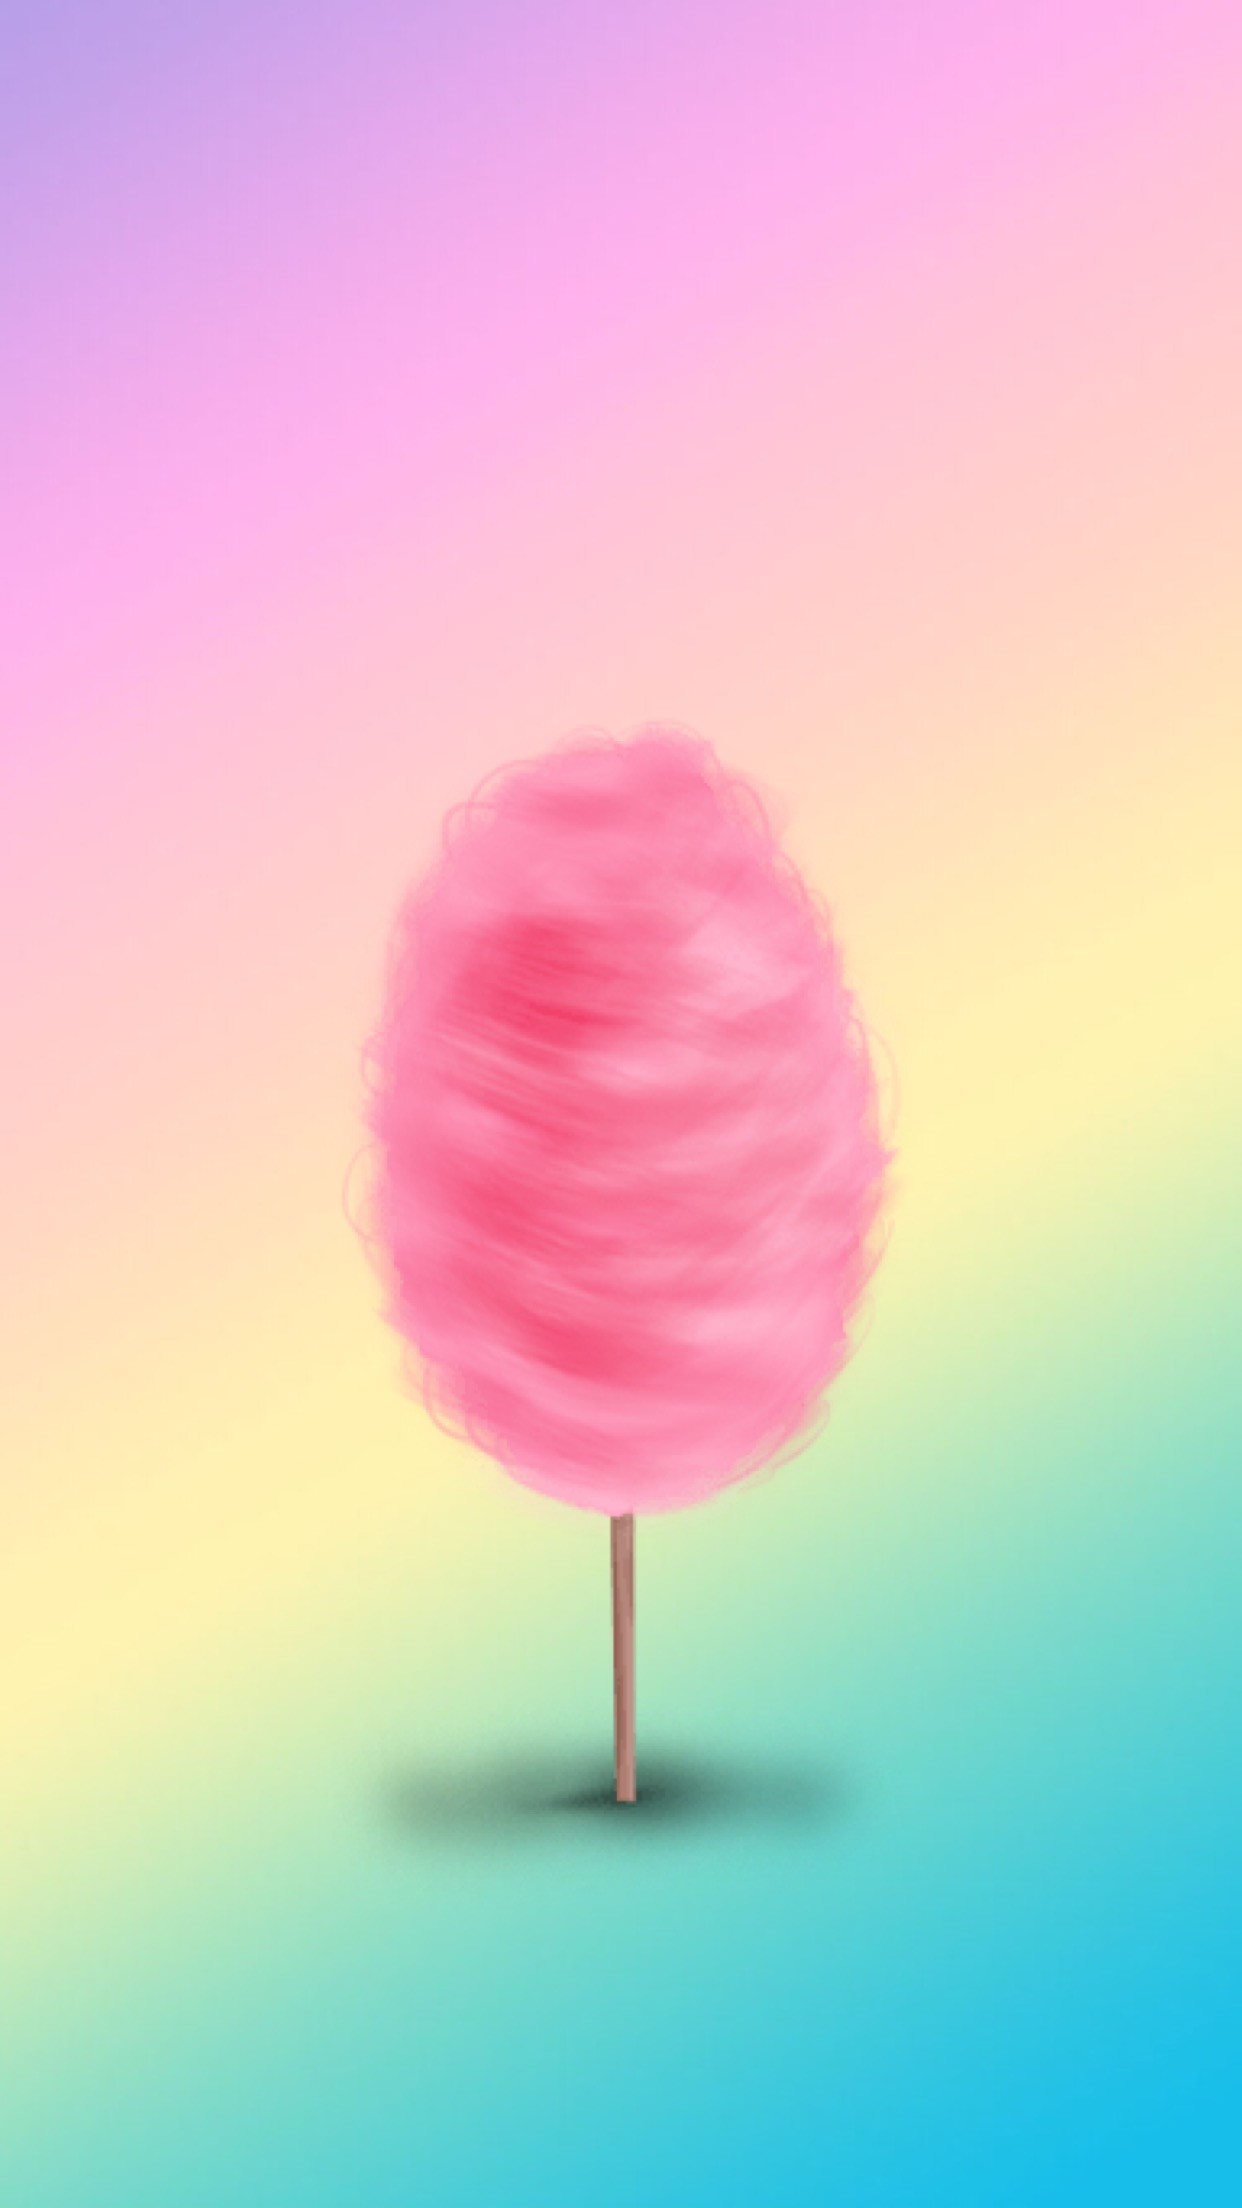 1242x2208 Pastel Wallpaper, Kawaii Wallpaper, Iphone Backgrounds, Iphone Wallpapers,  Prints, Ice, Food, Cotton Candy, Scrapbooks